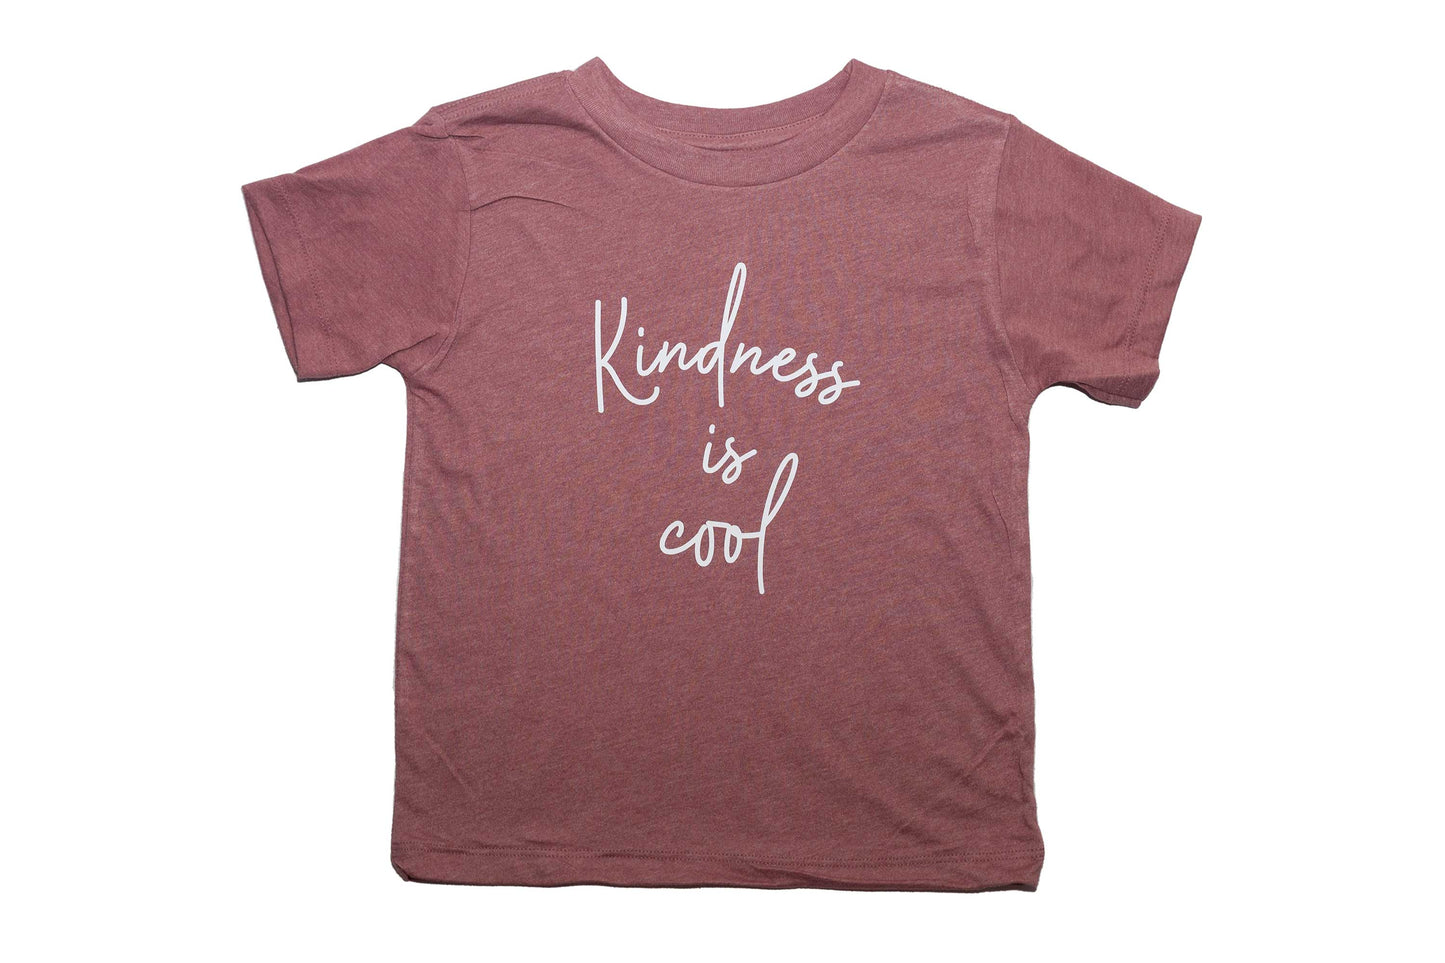 Load image into Gallery viewer, Kindness Is Cool Tee - Natural
